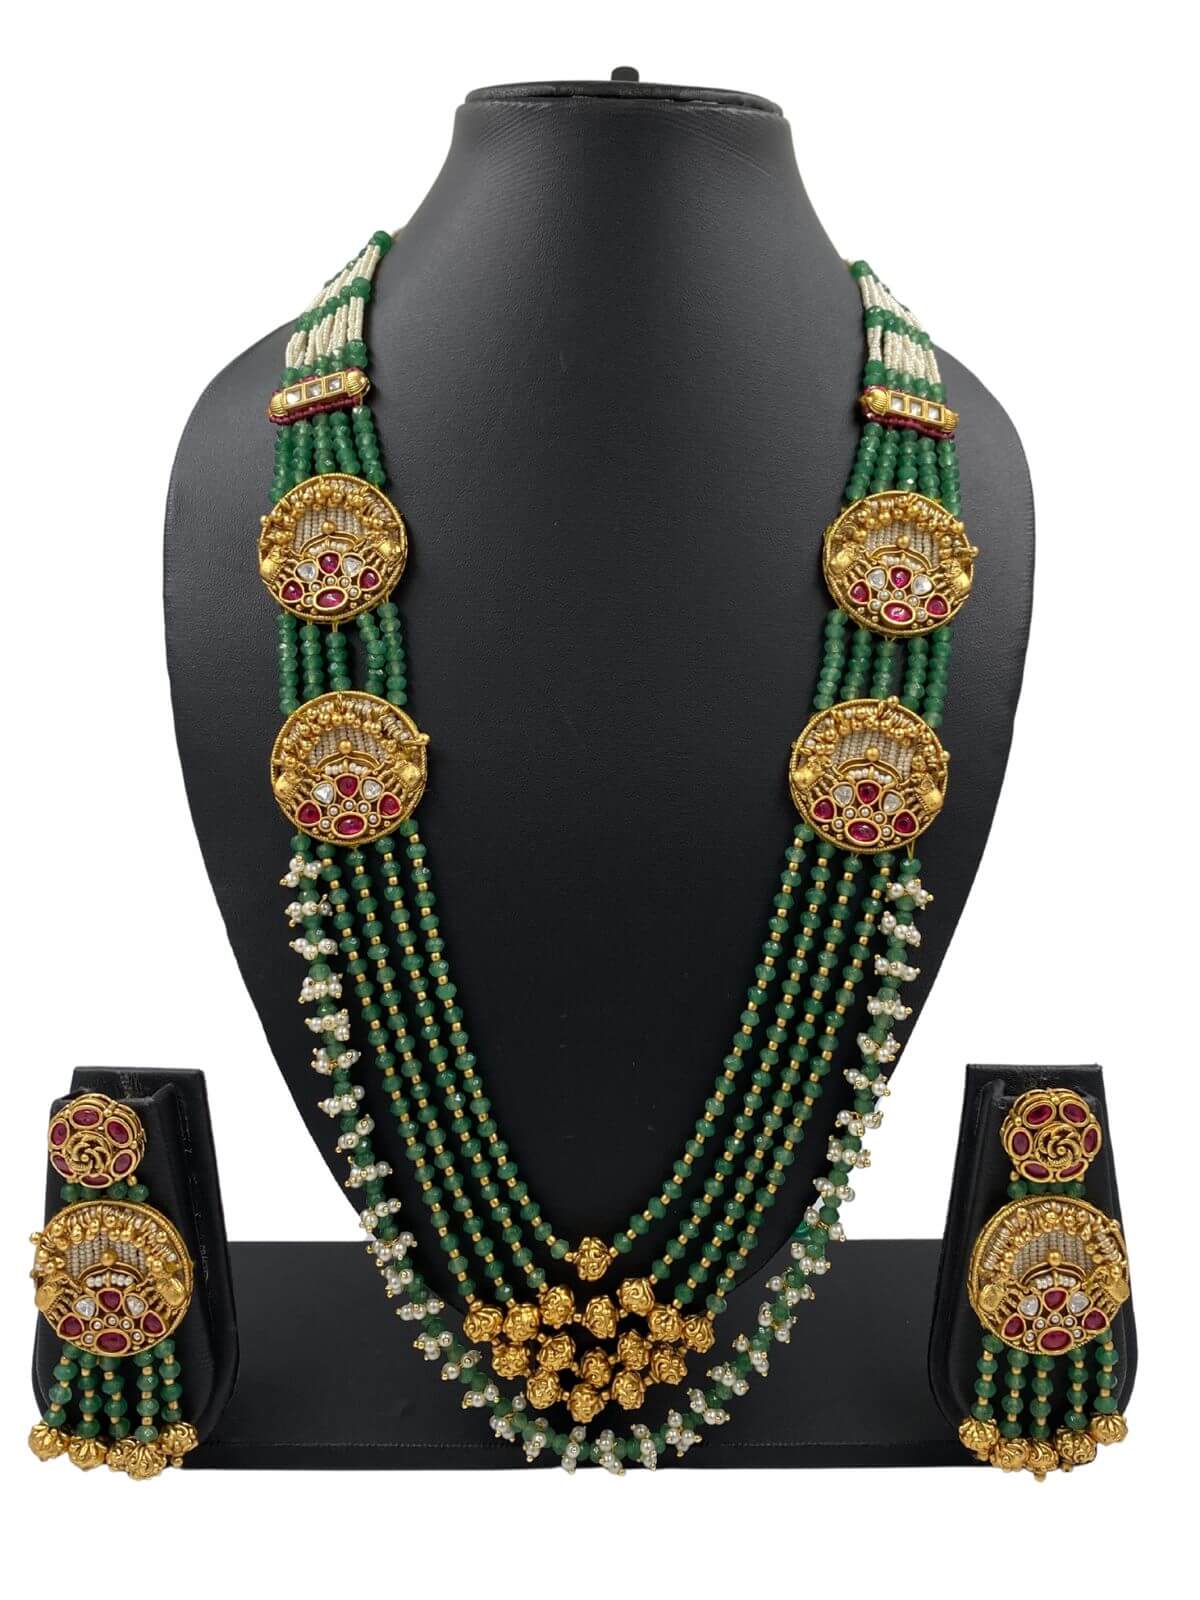  Long Layered Green Beads Haram Necklace With Antique Kundan Brooches